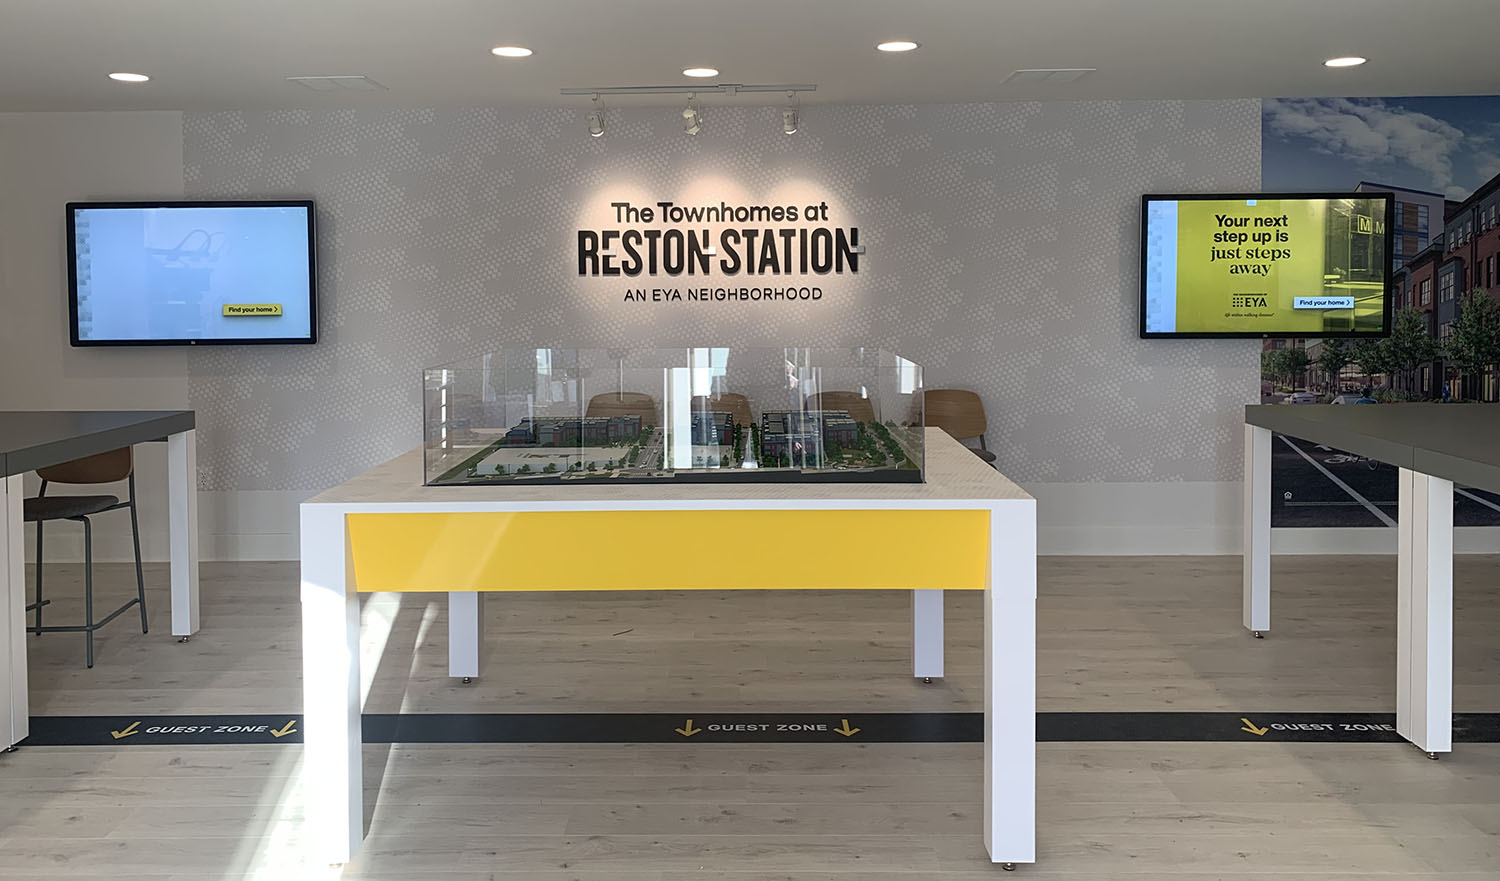 The Townhomes at Reston Station: Now open for in-person appointments